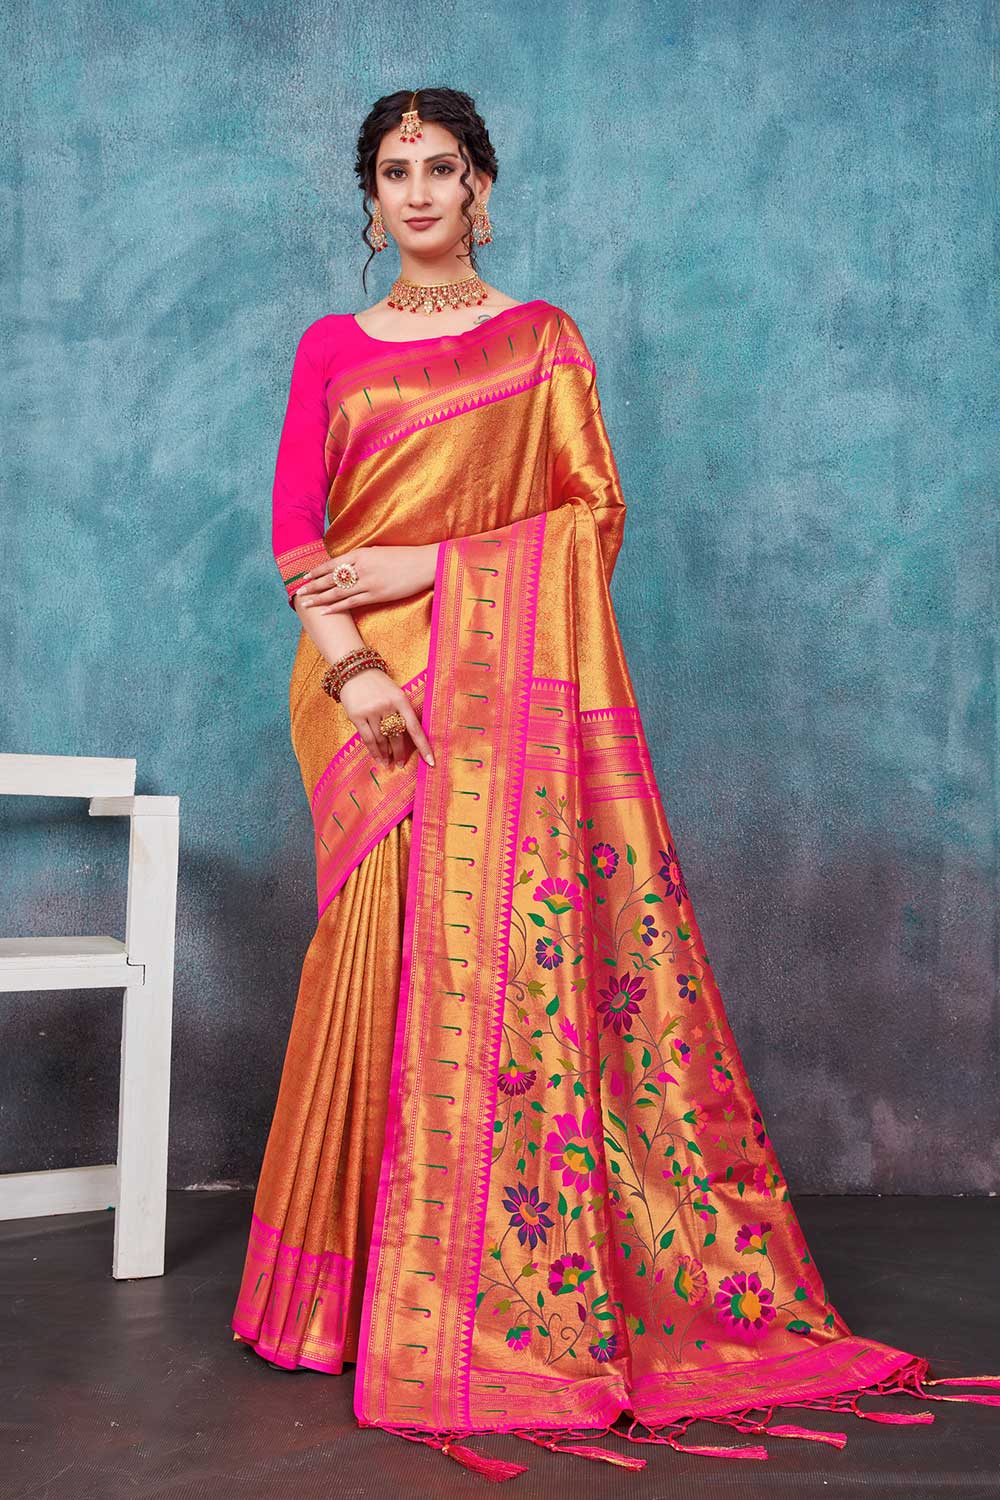 Shop Leah Orange Paithani Art Silk One Minute Saree at best offer at our  Store - One Minute Saree